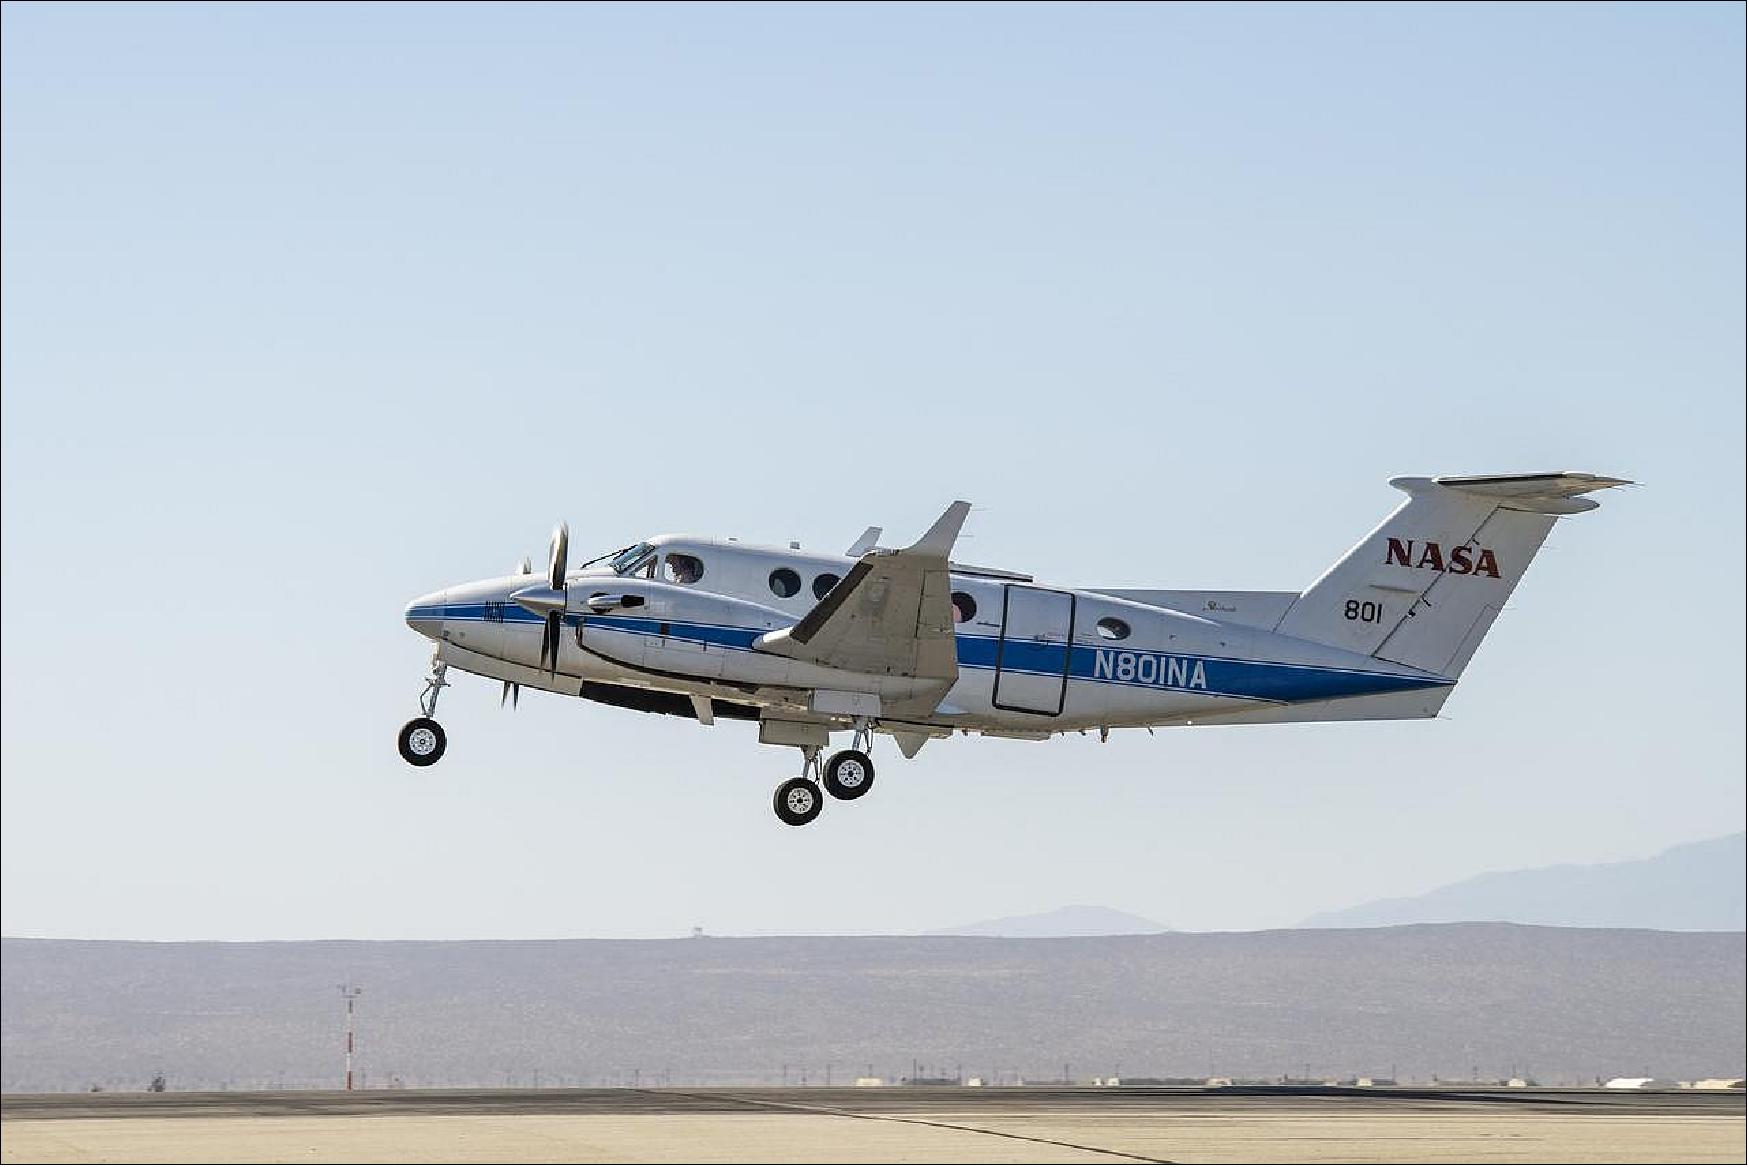 Figure 16: Flight crews at NASA's Armstrong Flight Research Center in Edwards, California, flew the Sub-Mesoscale Ocean Dynamics Experiment (S-MODE) installed in the B200 King Air on May 3, 2021 (image credit: Carla Thomas, NASA Armstrong Flight Research center in Edwards, California)